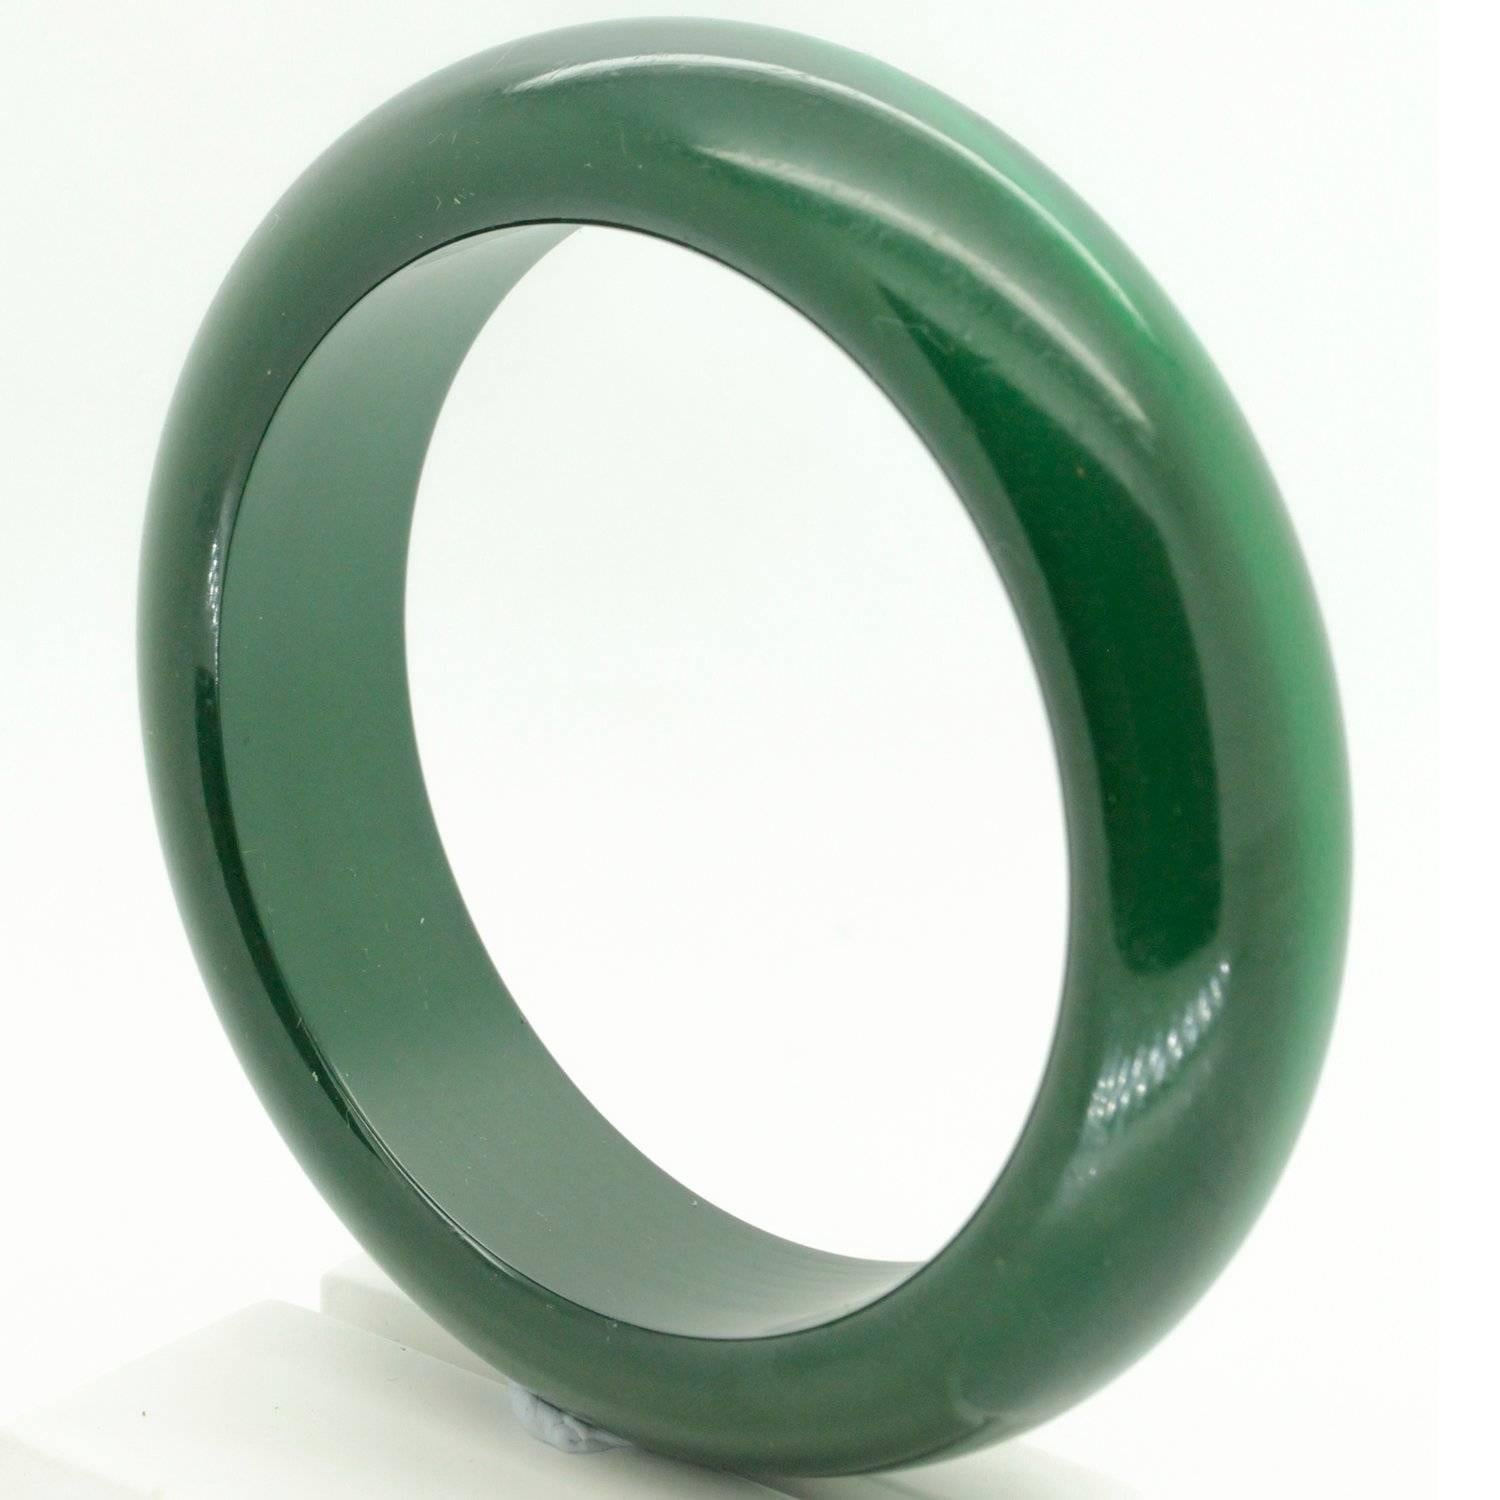 Retro Vintage Lucite Deep Emerald Green with Moonglow Finish Bangle For Sale 2